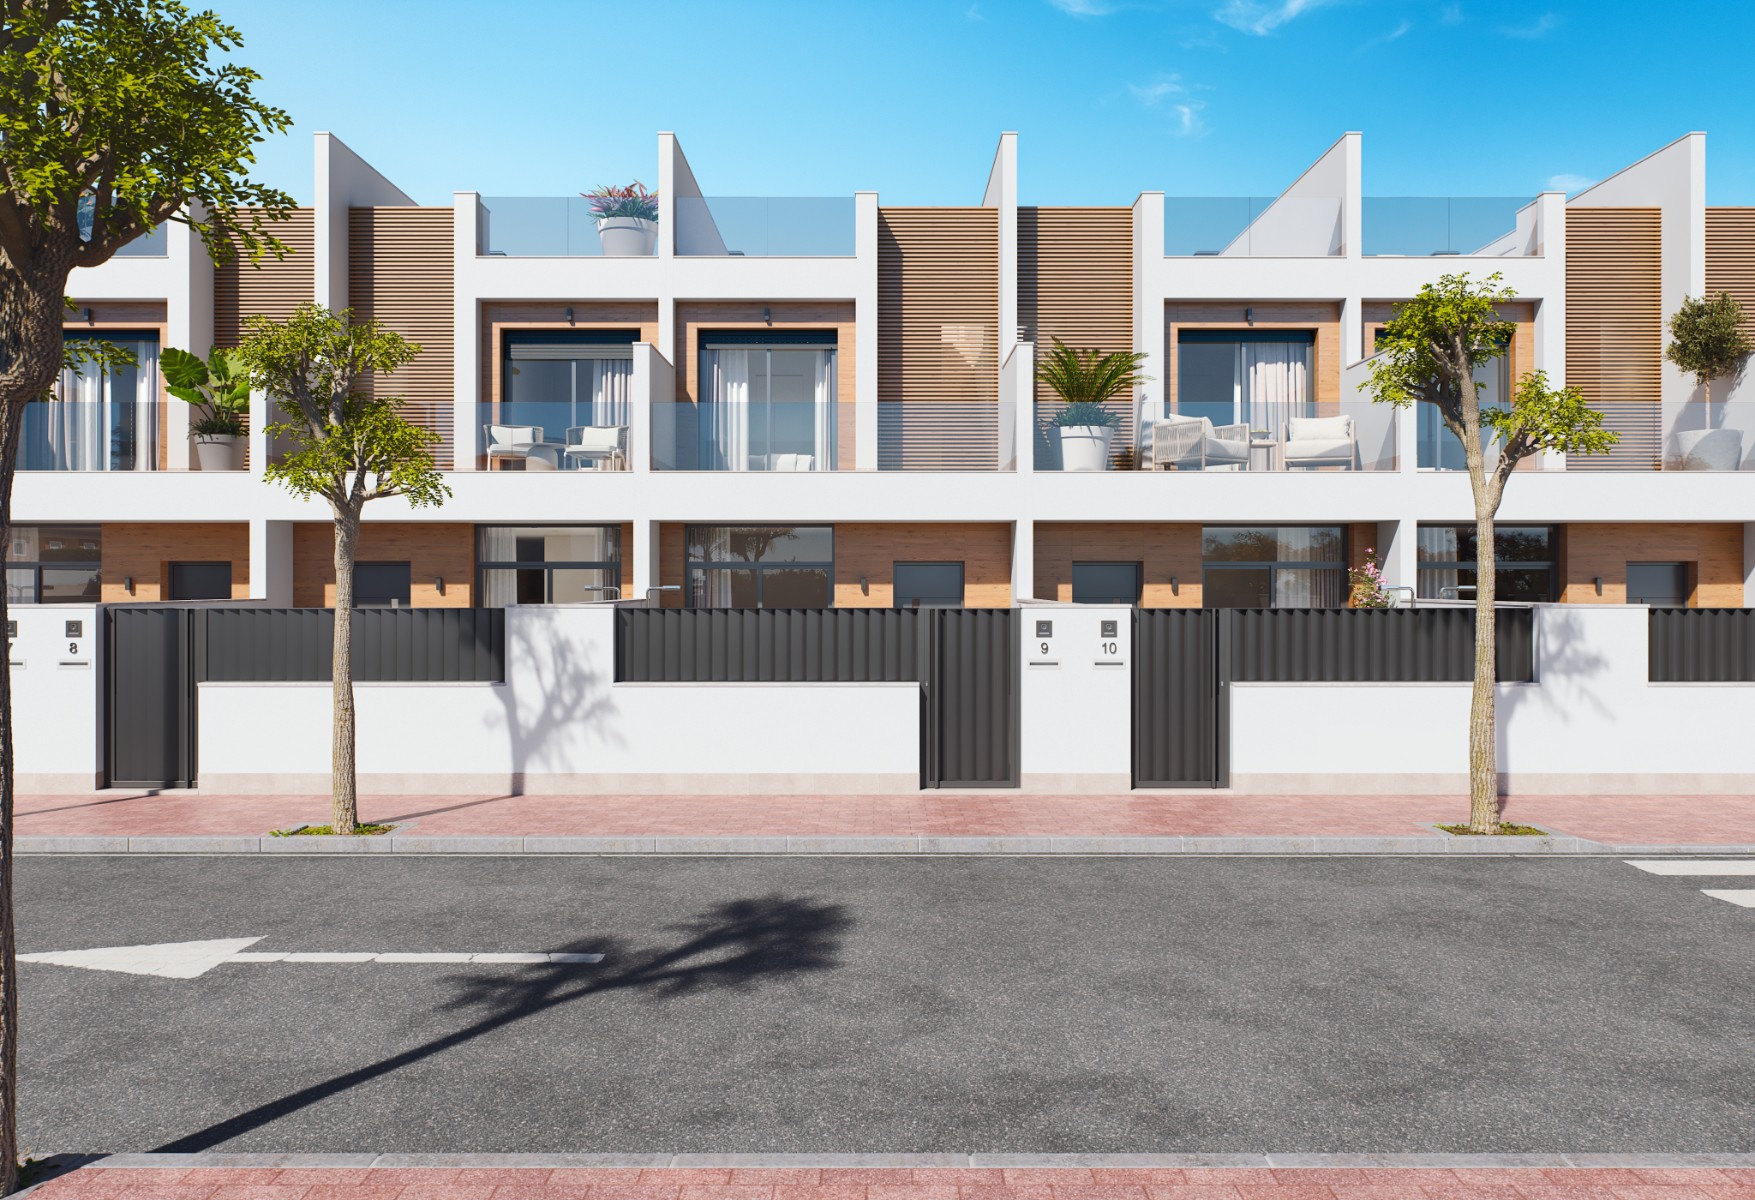 Property Image 532446-los-antolinos-townhouses-4-3